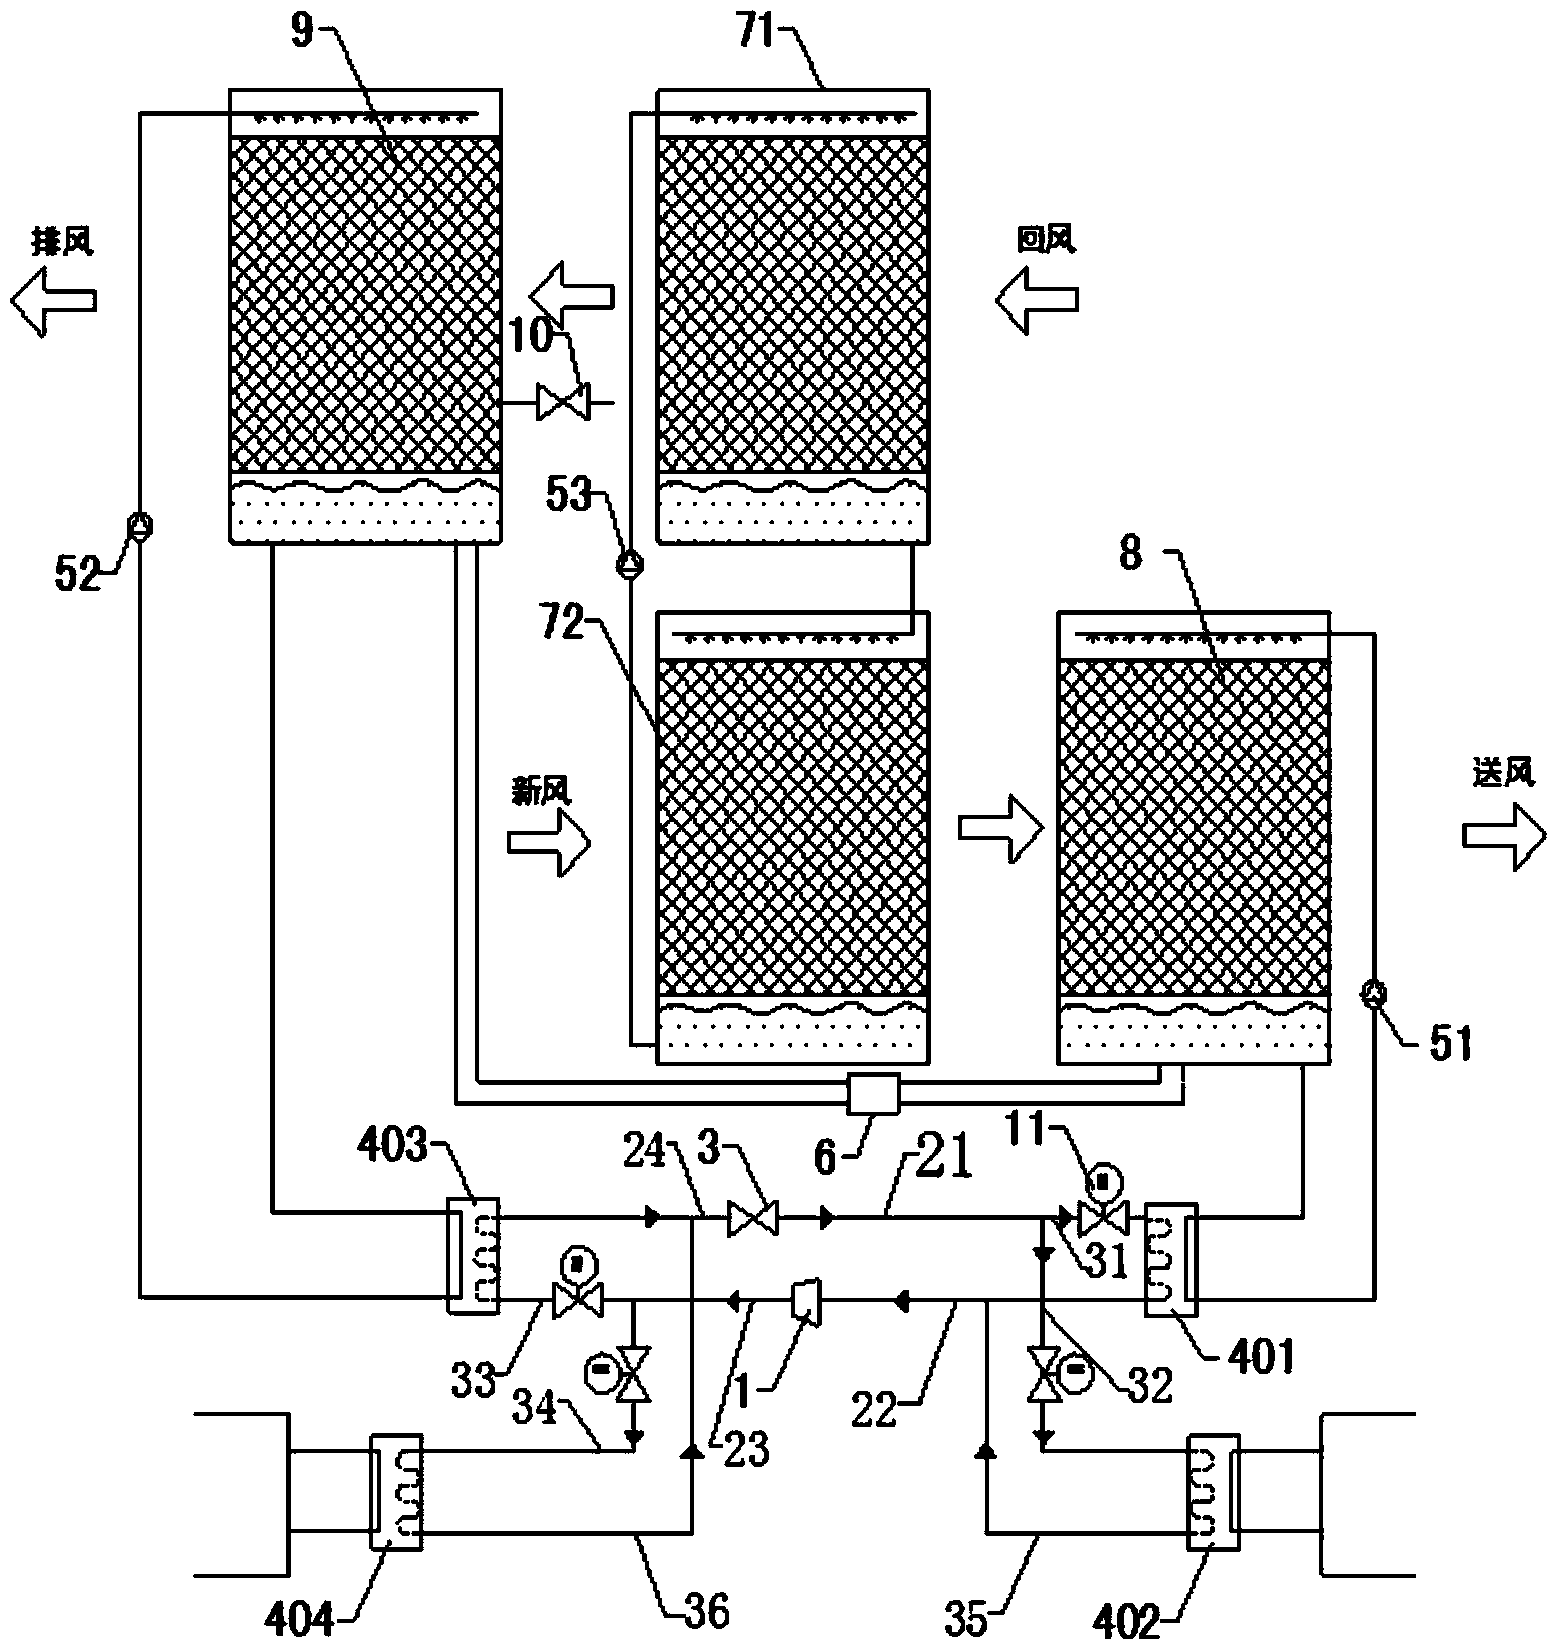 Air conditioning device capable of treating air heat and humidity load and producing cold water or hot water simultaneously